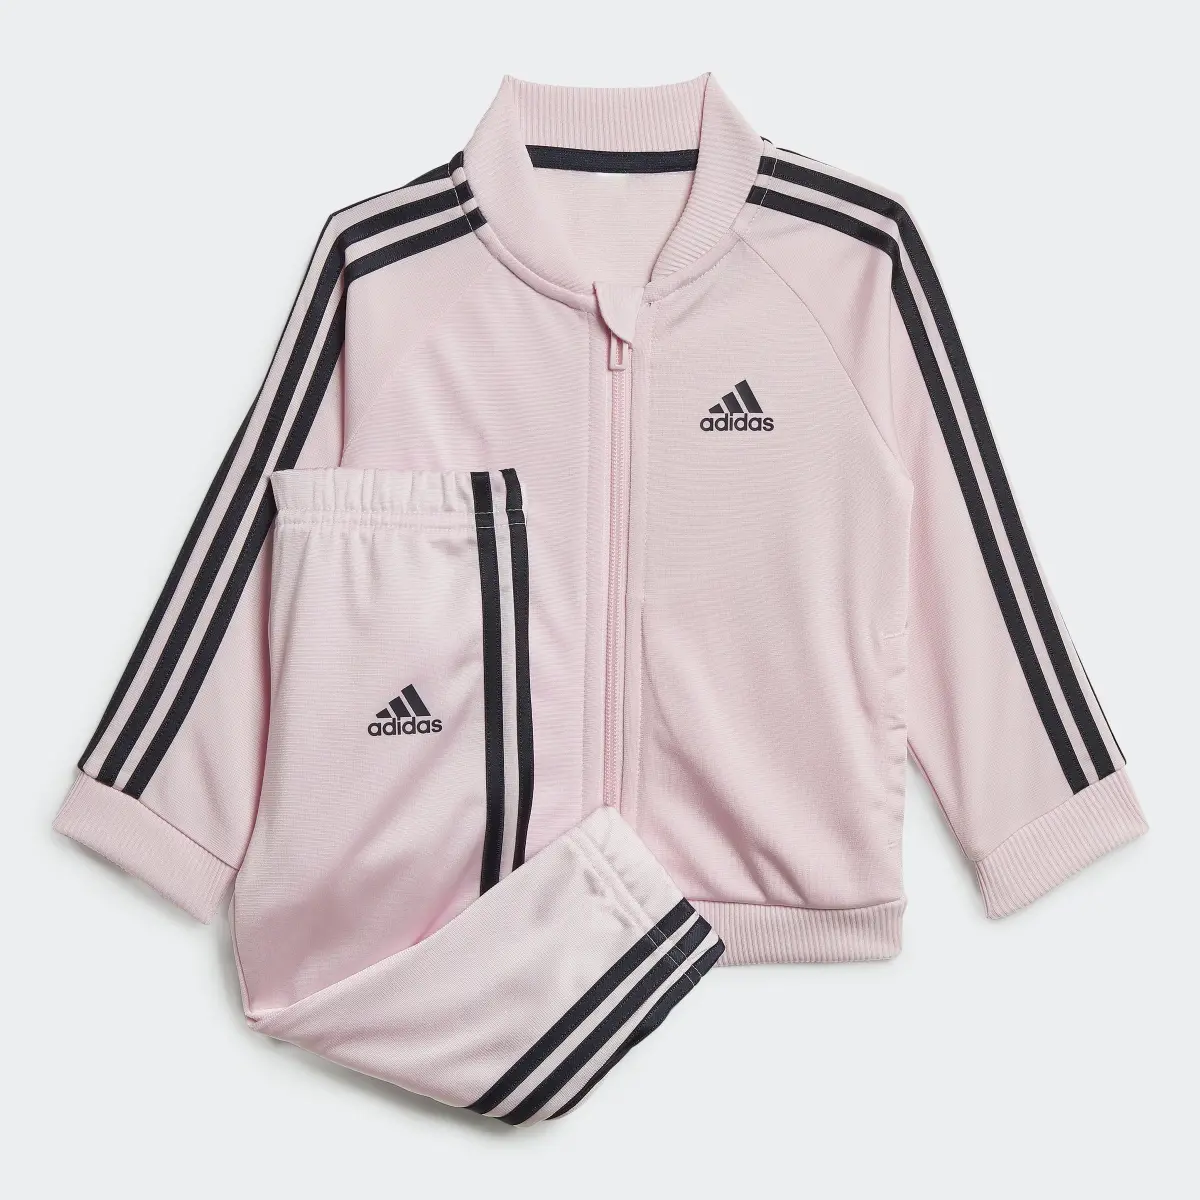 Adidas 3-Stripes Tricot Track Suit. 2